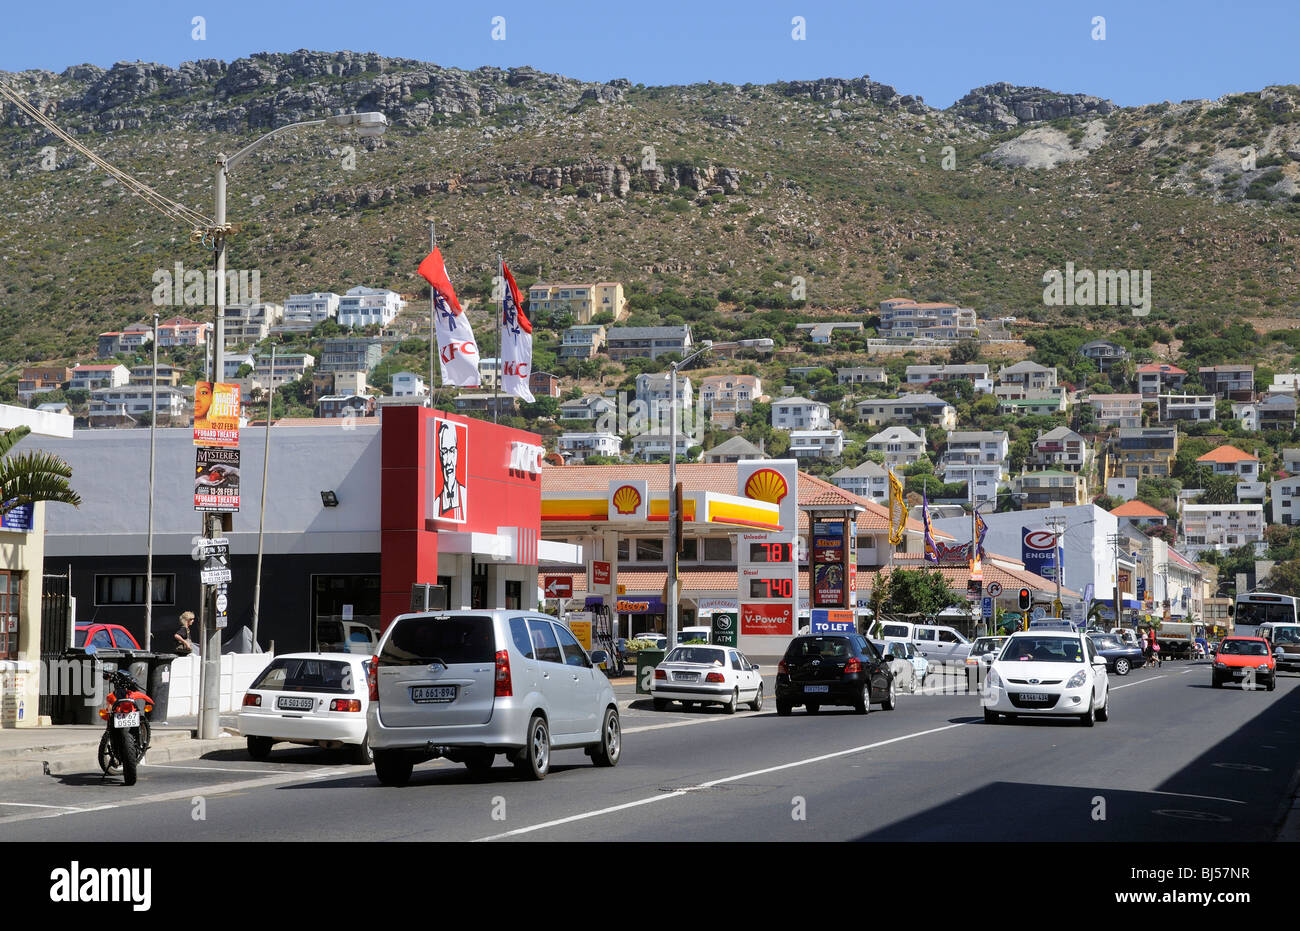 Fish Hoek a seaside resort town close to Cape Town South Africa with  housing on the mountainside overlooking the town centre Stock Photo - Alamy